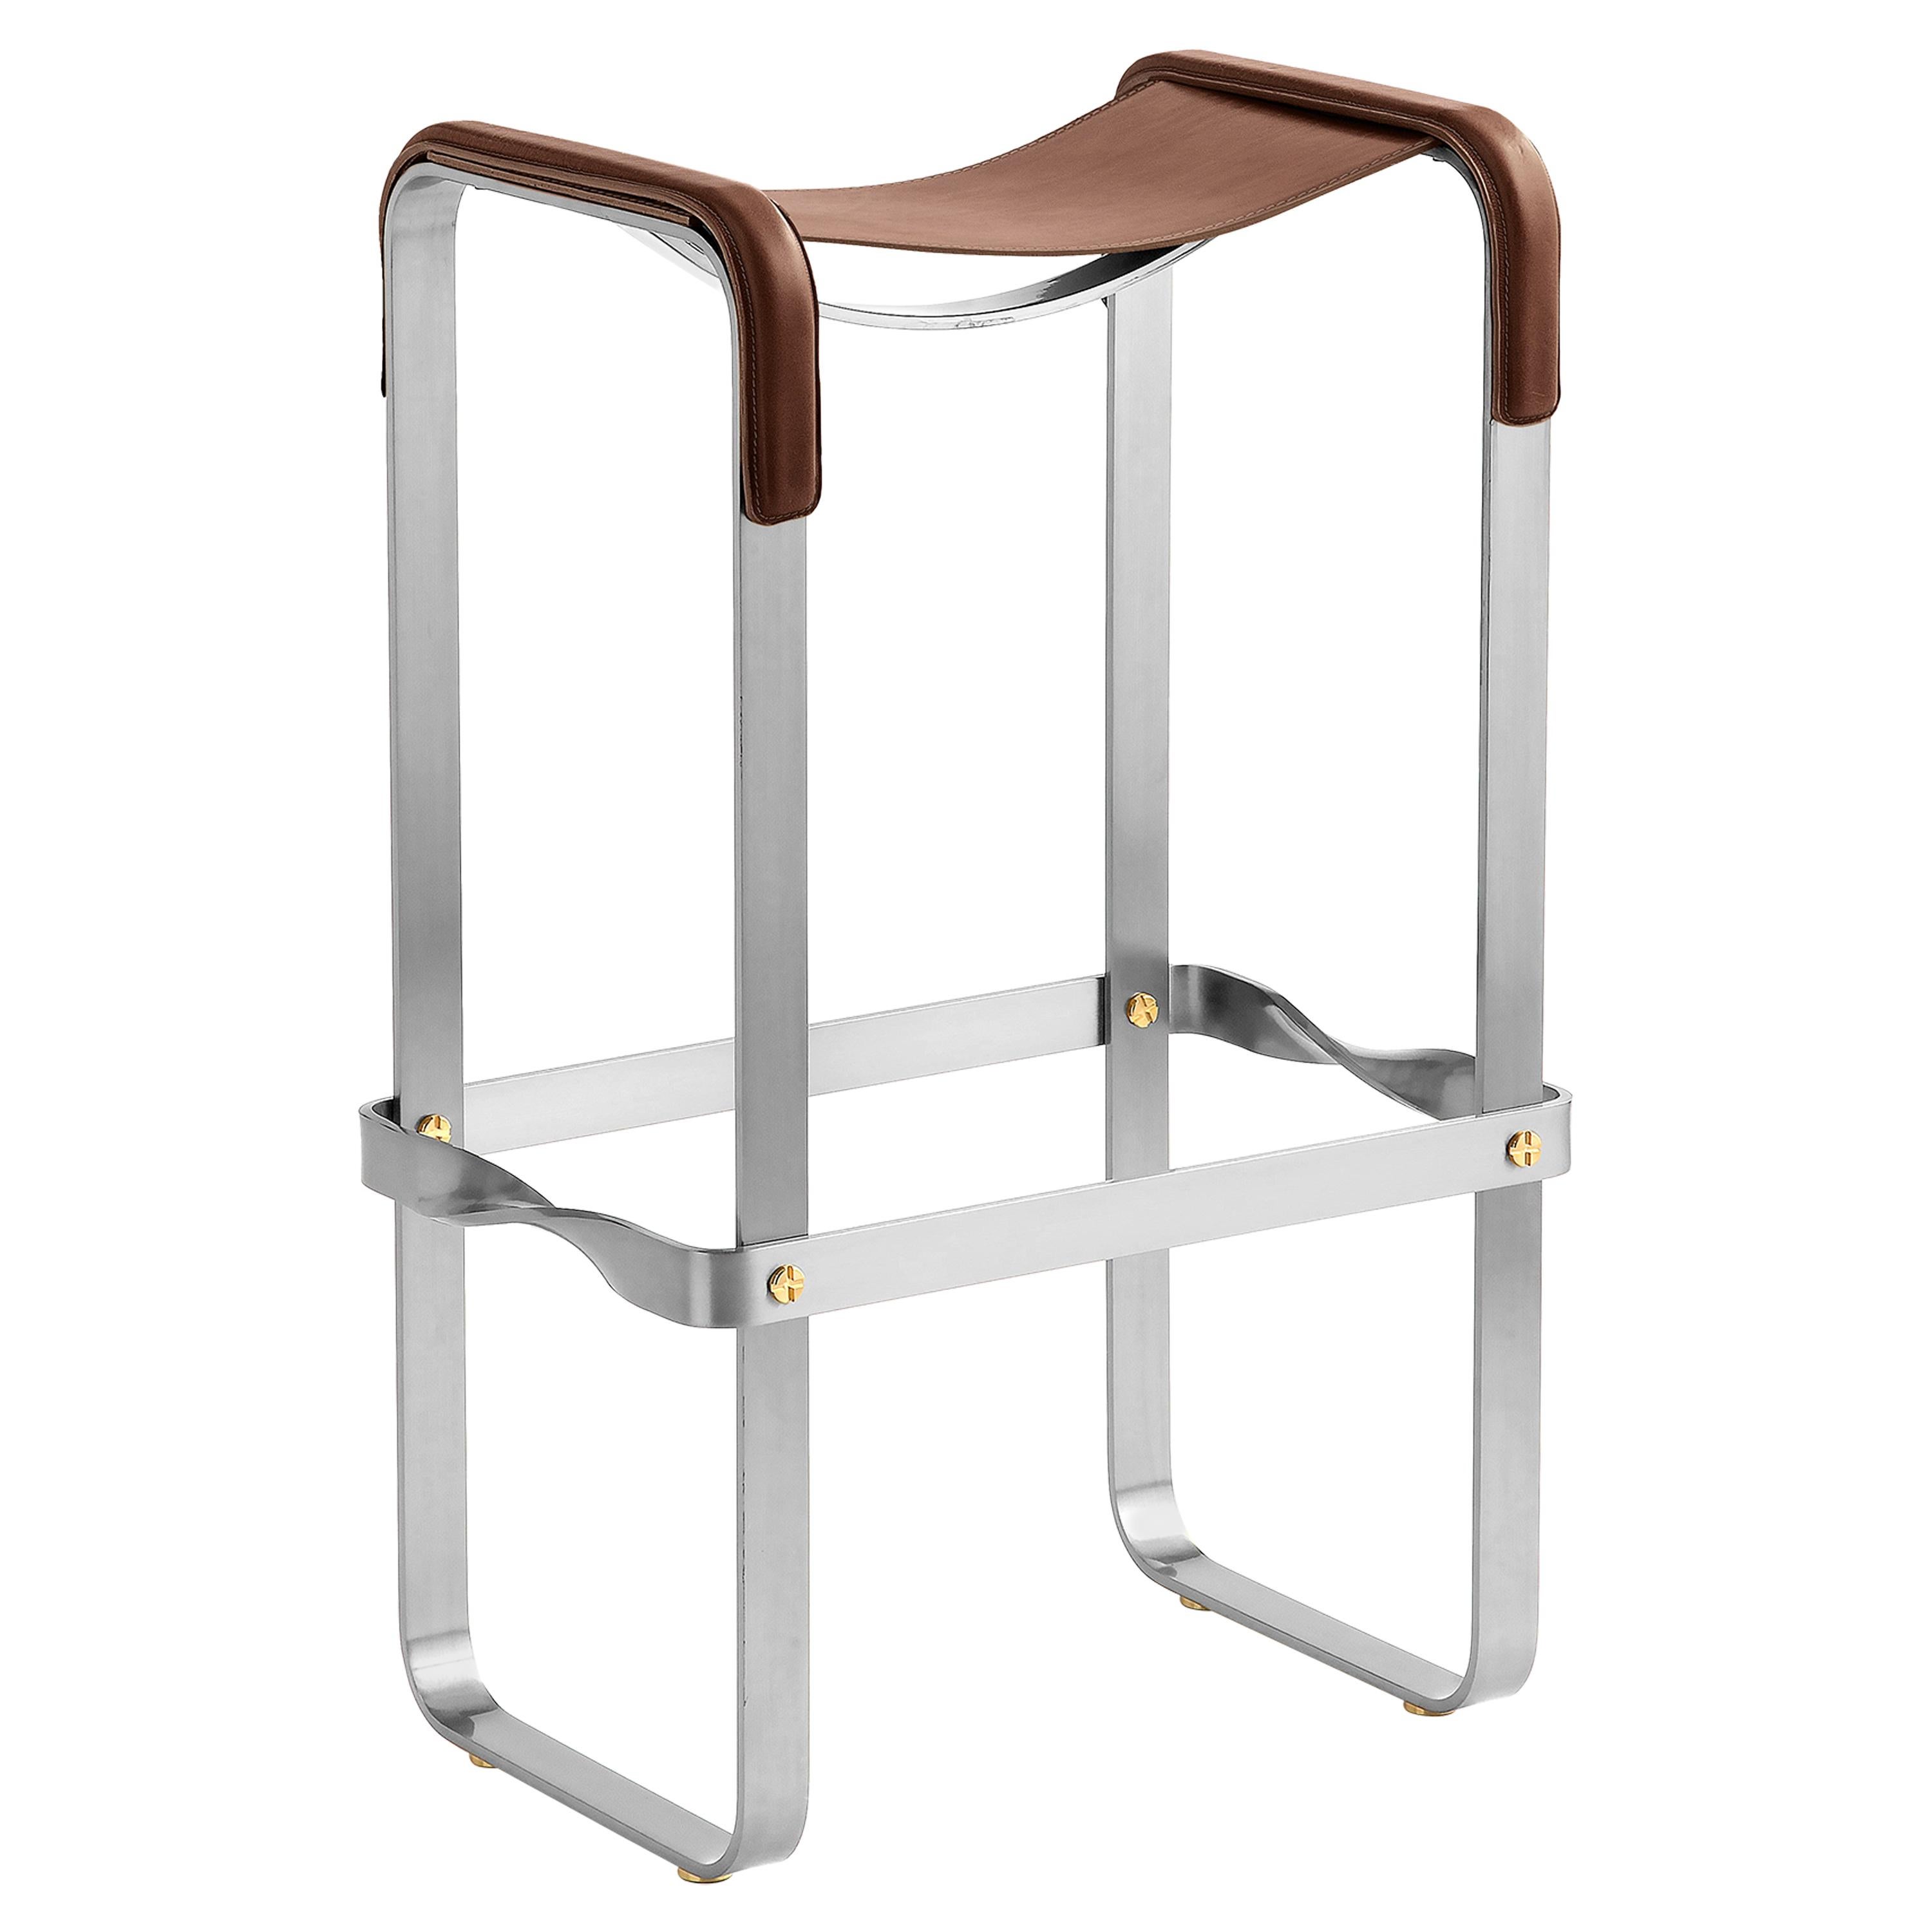 Elegant Classic Contemporary Bar Stool Silver Aged Metal & Dark Brown Leather For Sale